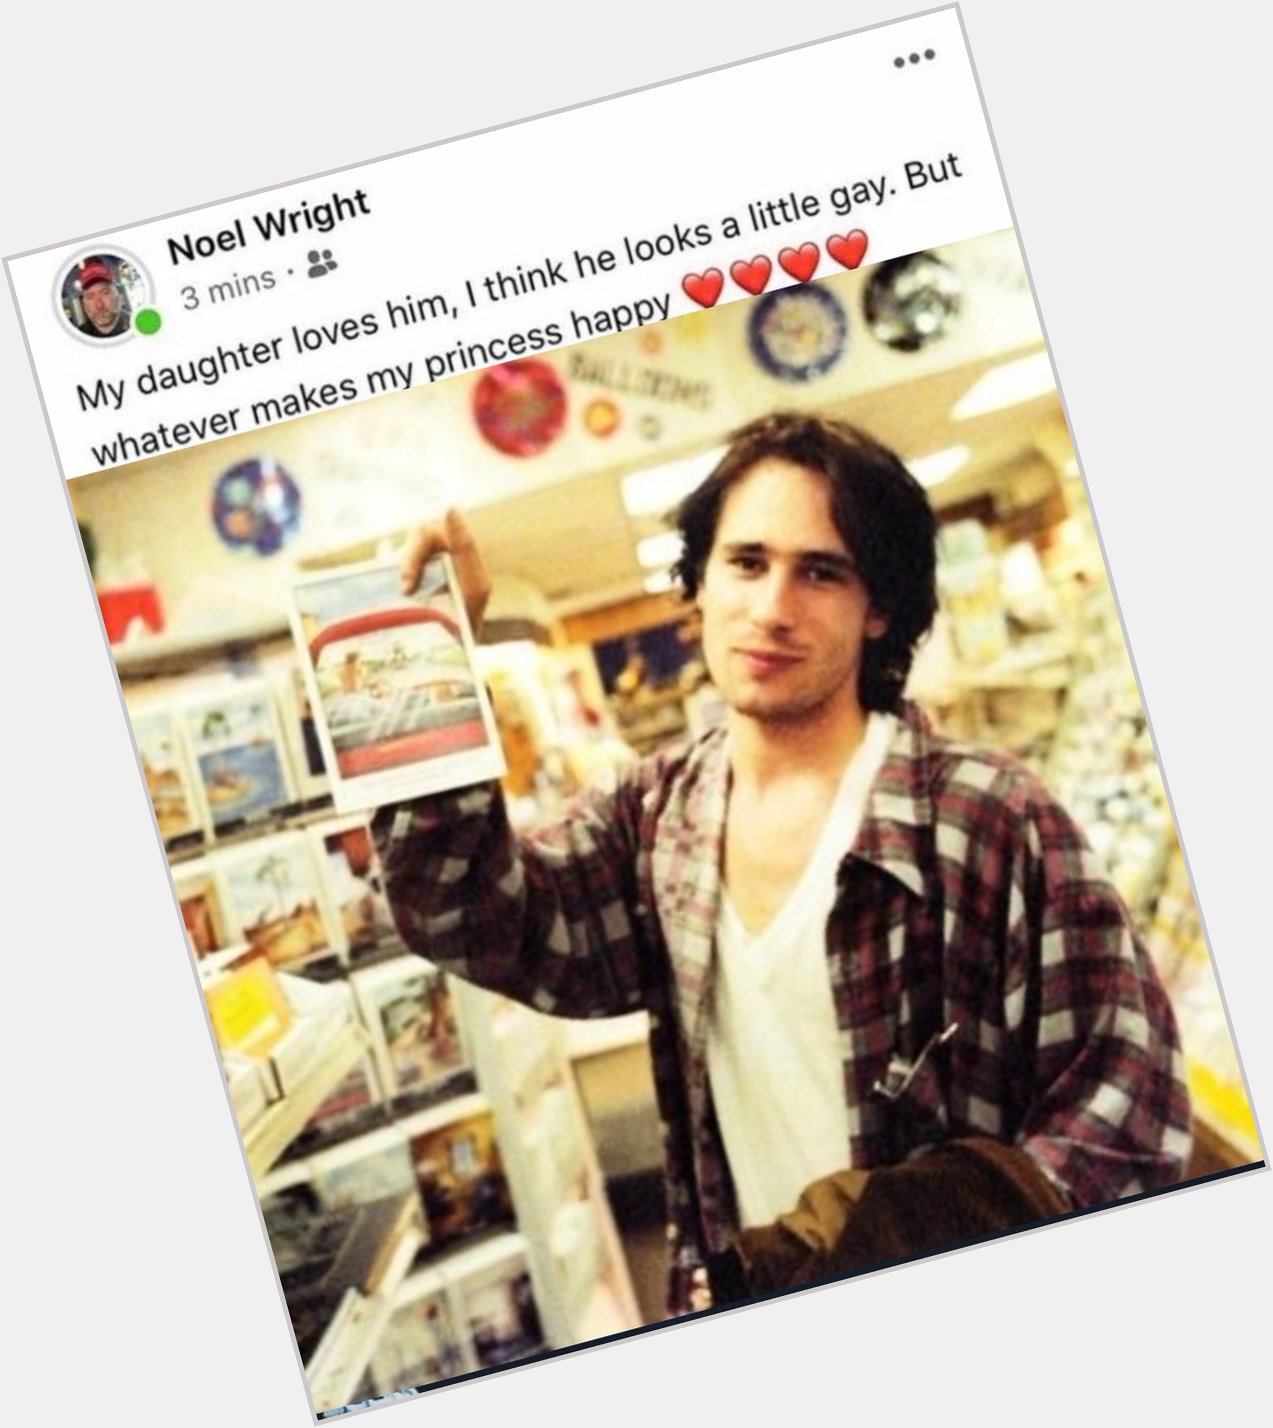 Happy birthday to jeff buckley .. i hope you know half of your audience are Gay Depressed Teens  